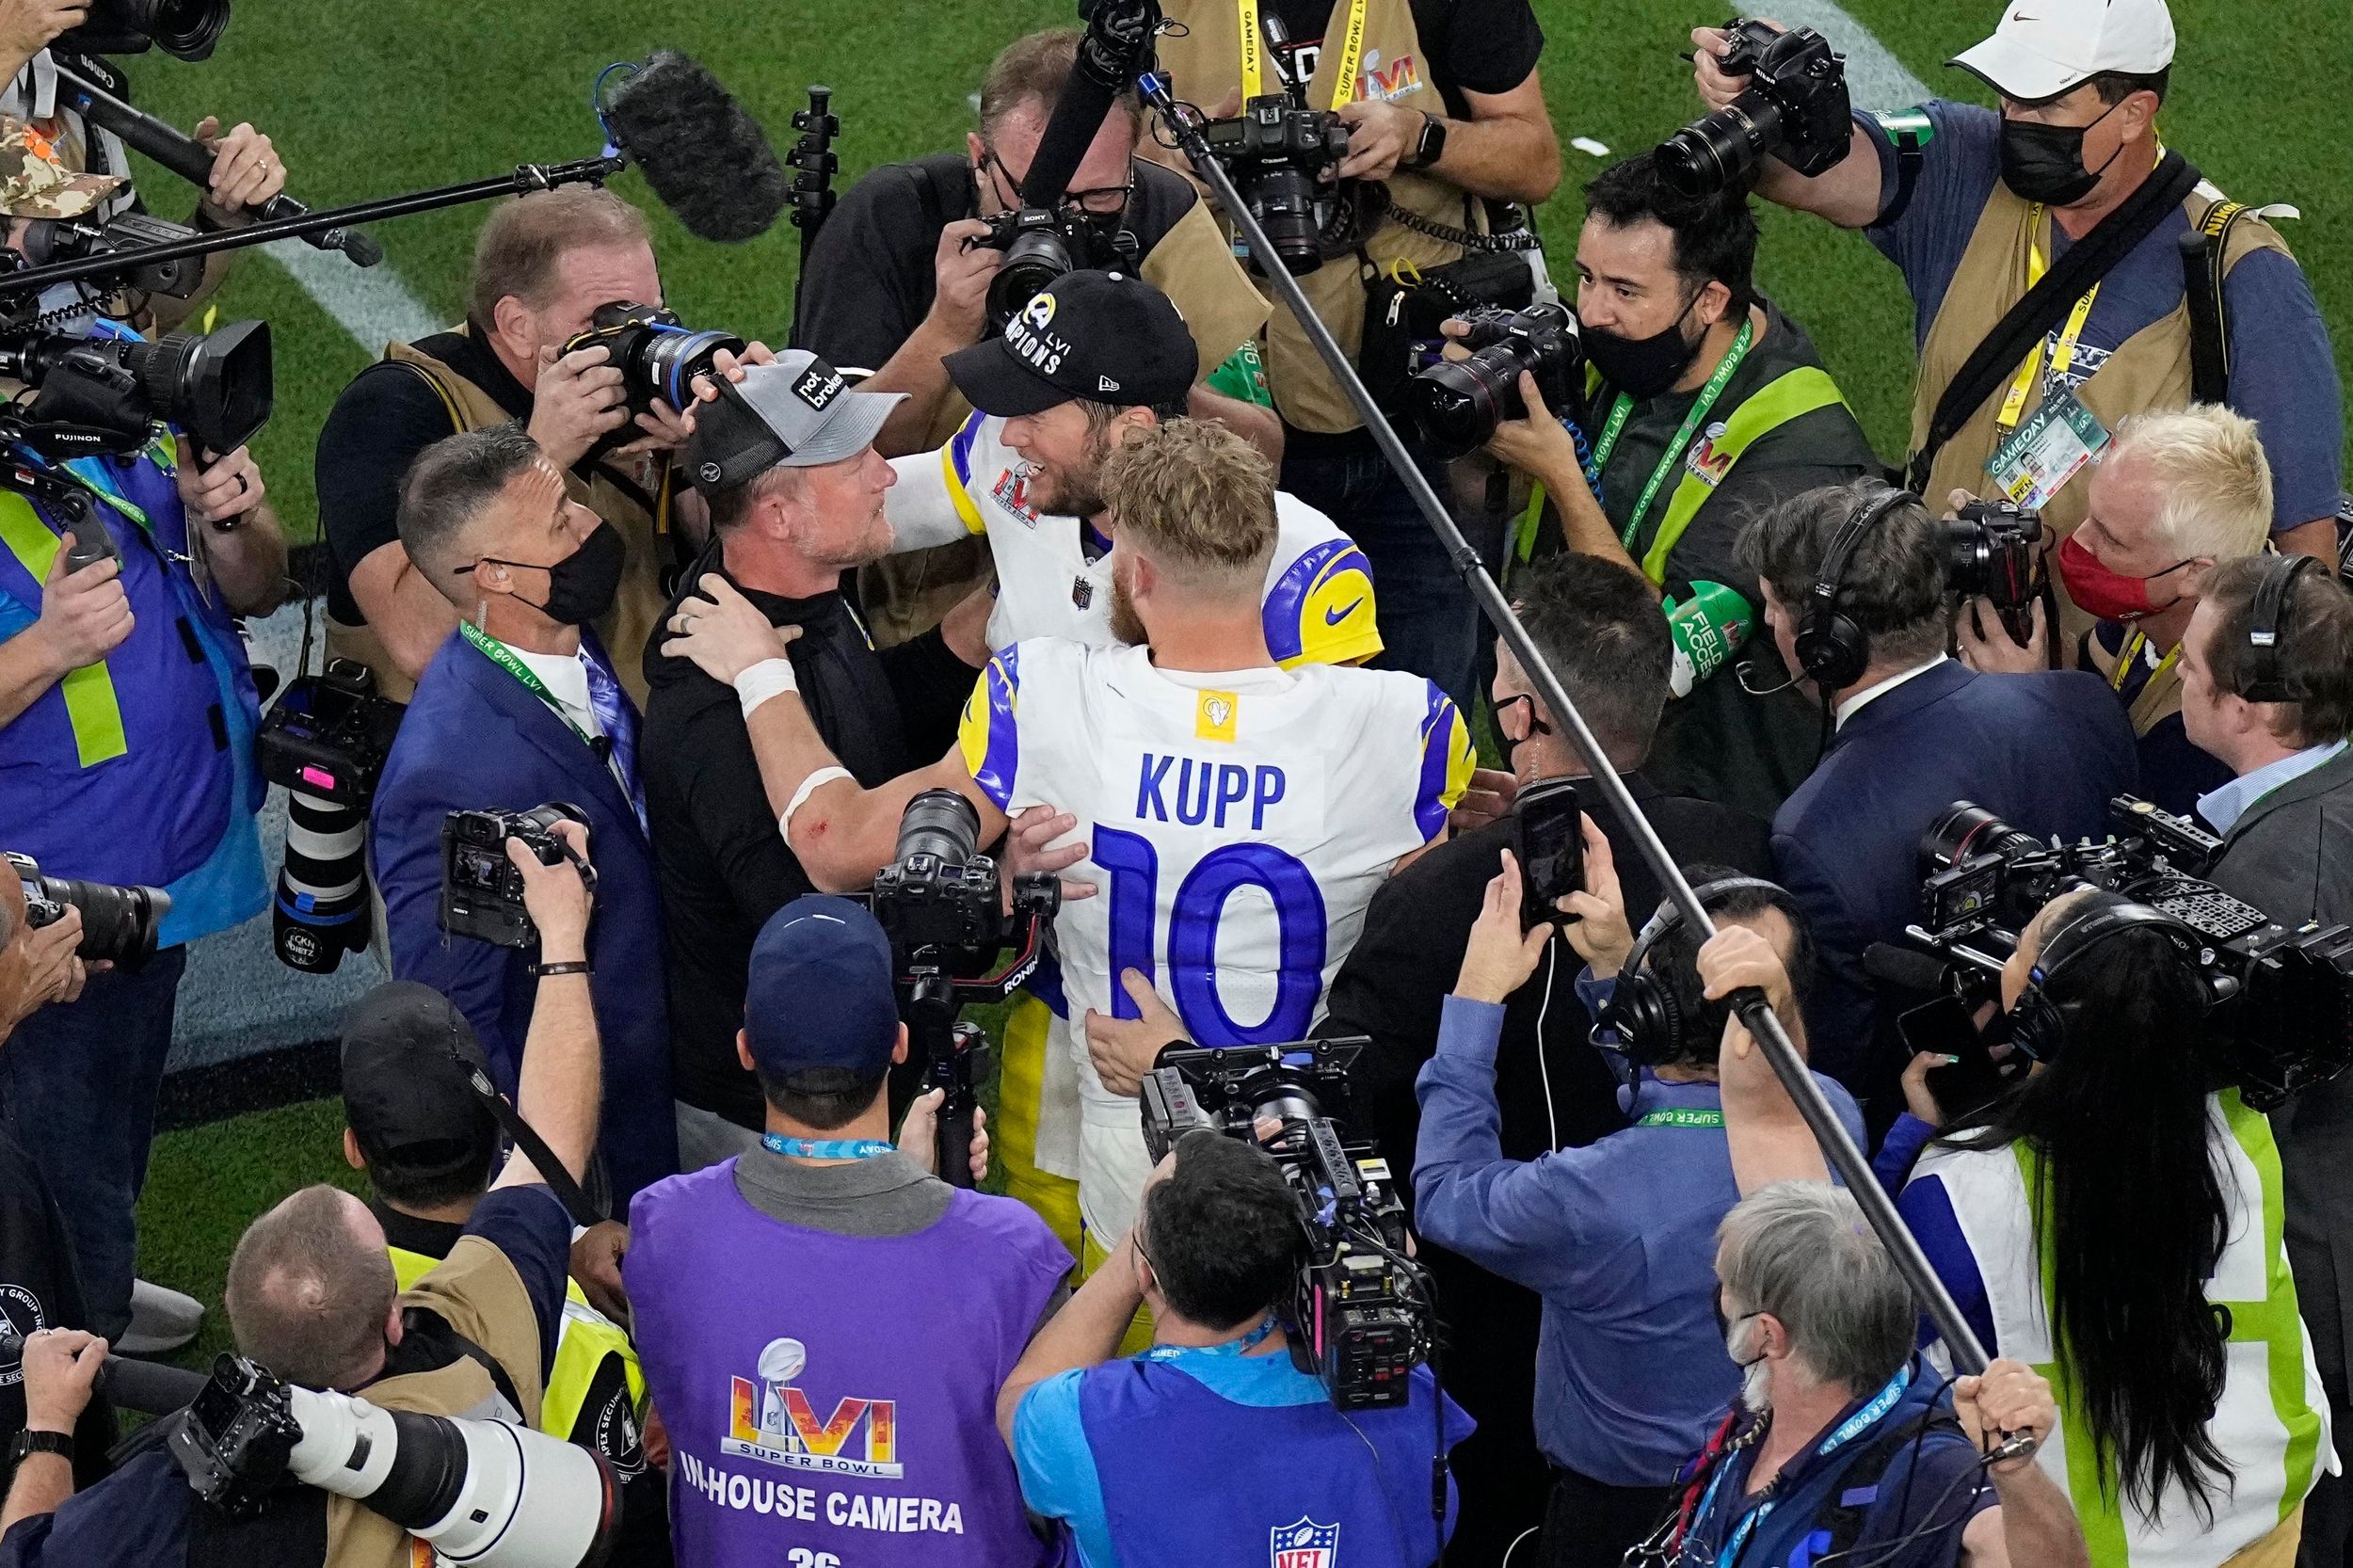 Commentary: Super Bowl MVP Cooper Kupp showed why he's No. 1, and